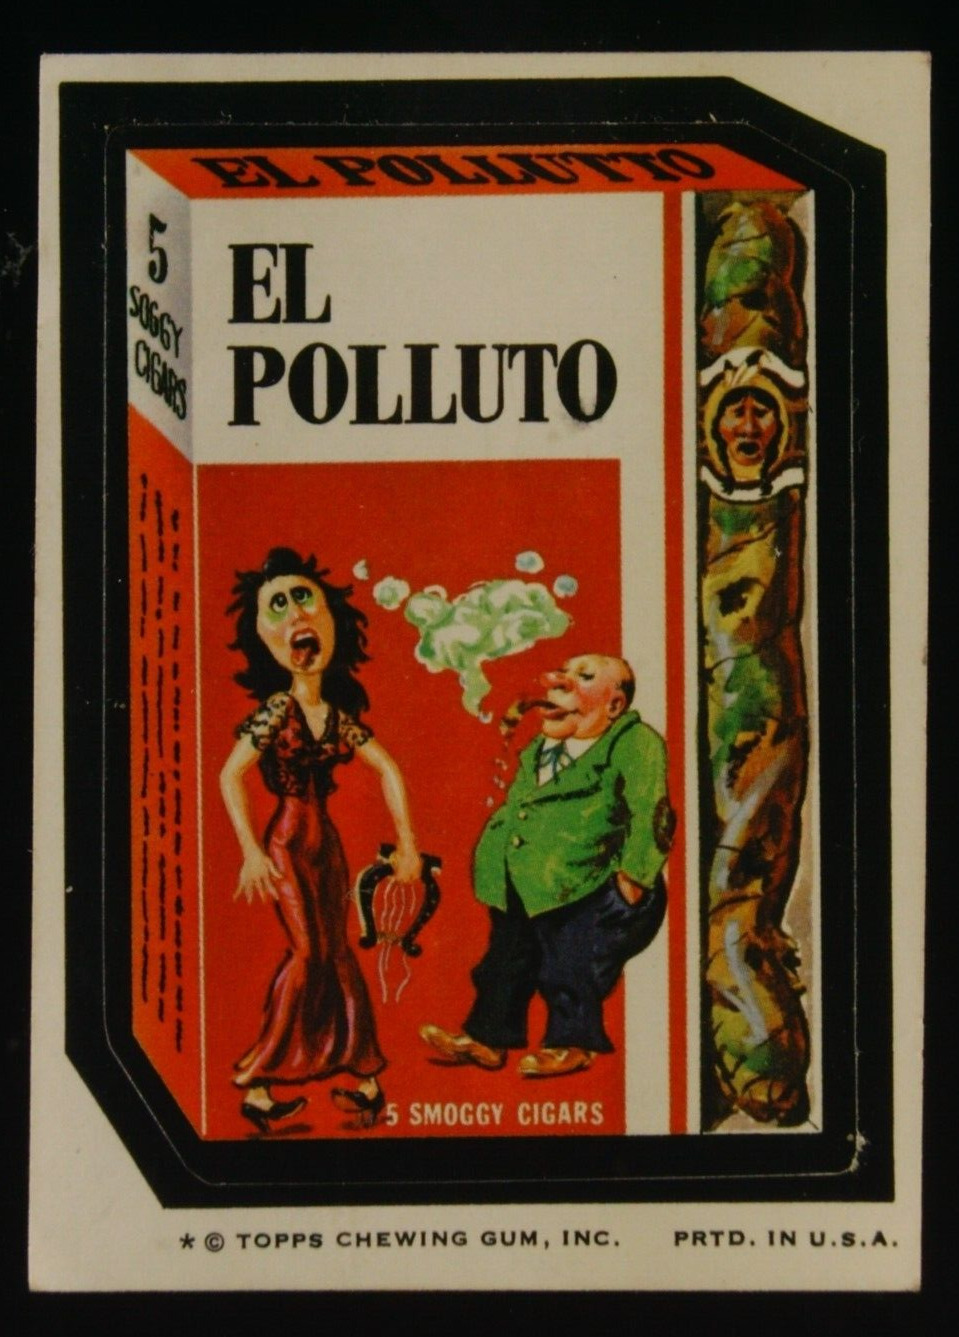 1974 Topps Wacky Packages Series #7 El Polluto Cigars NM